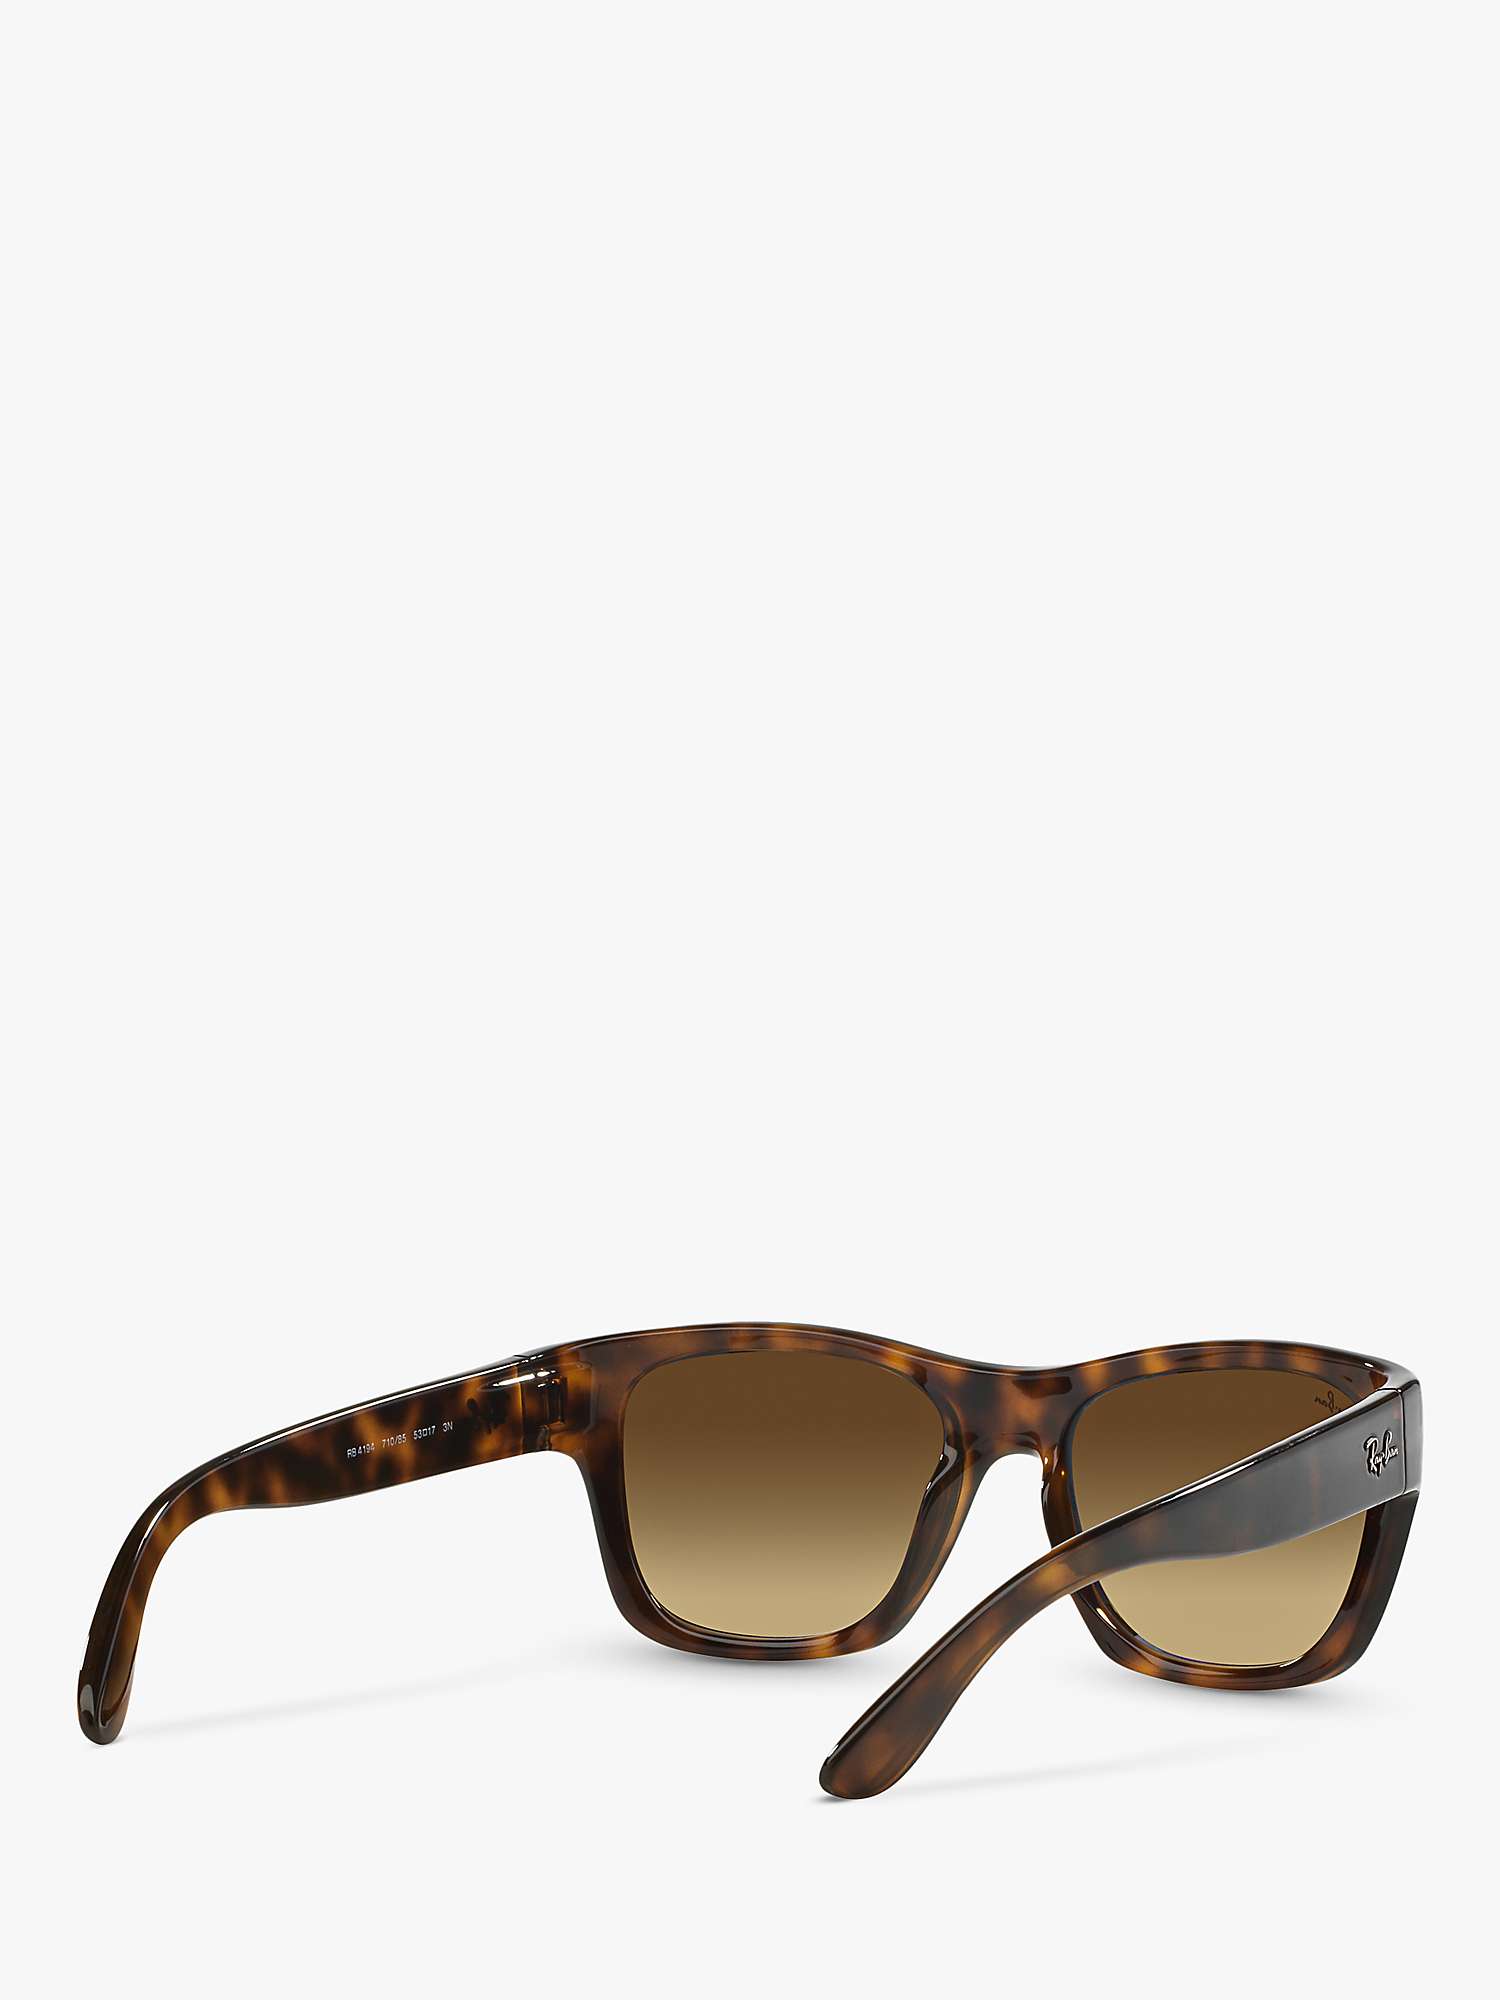 Buy Ray-Ban RB4194 Unisex Square Sunglasses, Havana/Brown Online at johnlewis.com